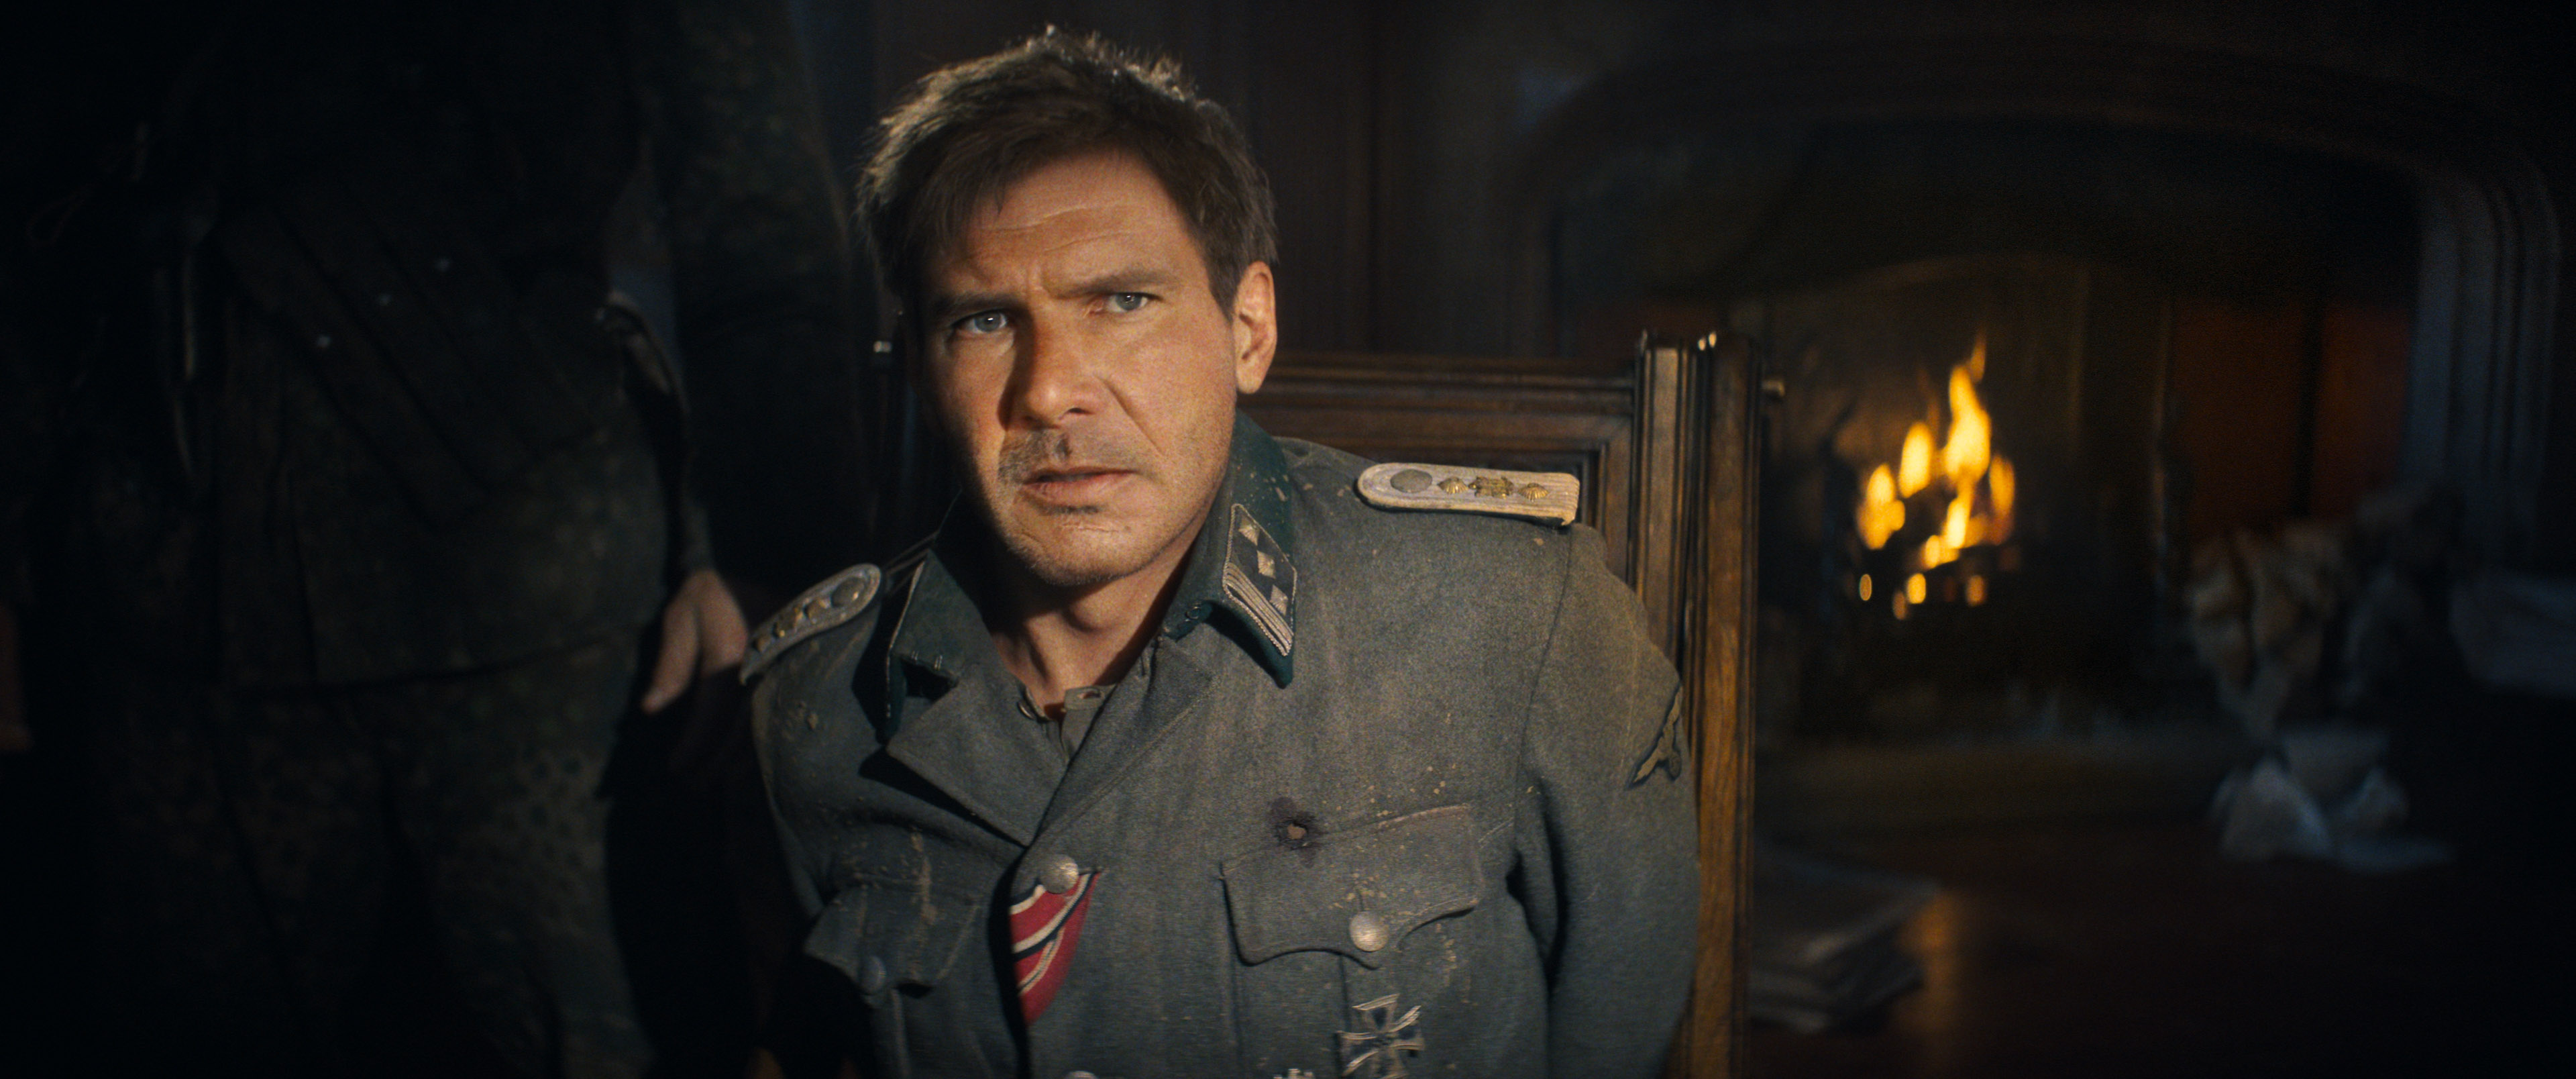 Harrison Ford as Indiana Jones, looking about 40 years old due to CG de-aging, and wearing a grey suit with random American-flag fabric details, looks very concerned about something happening offscreen in Indiana Jones and the Dial of Destiny